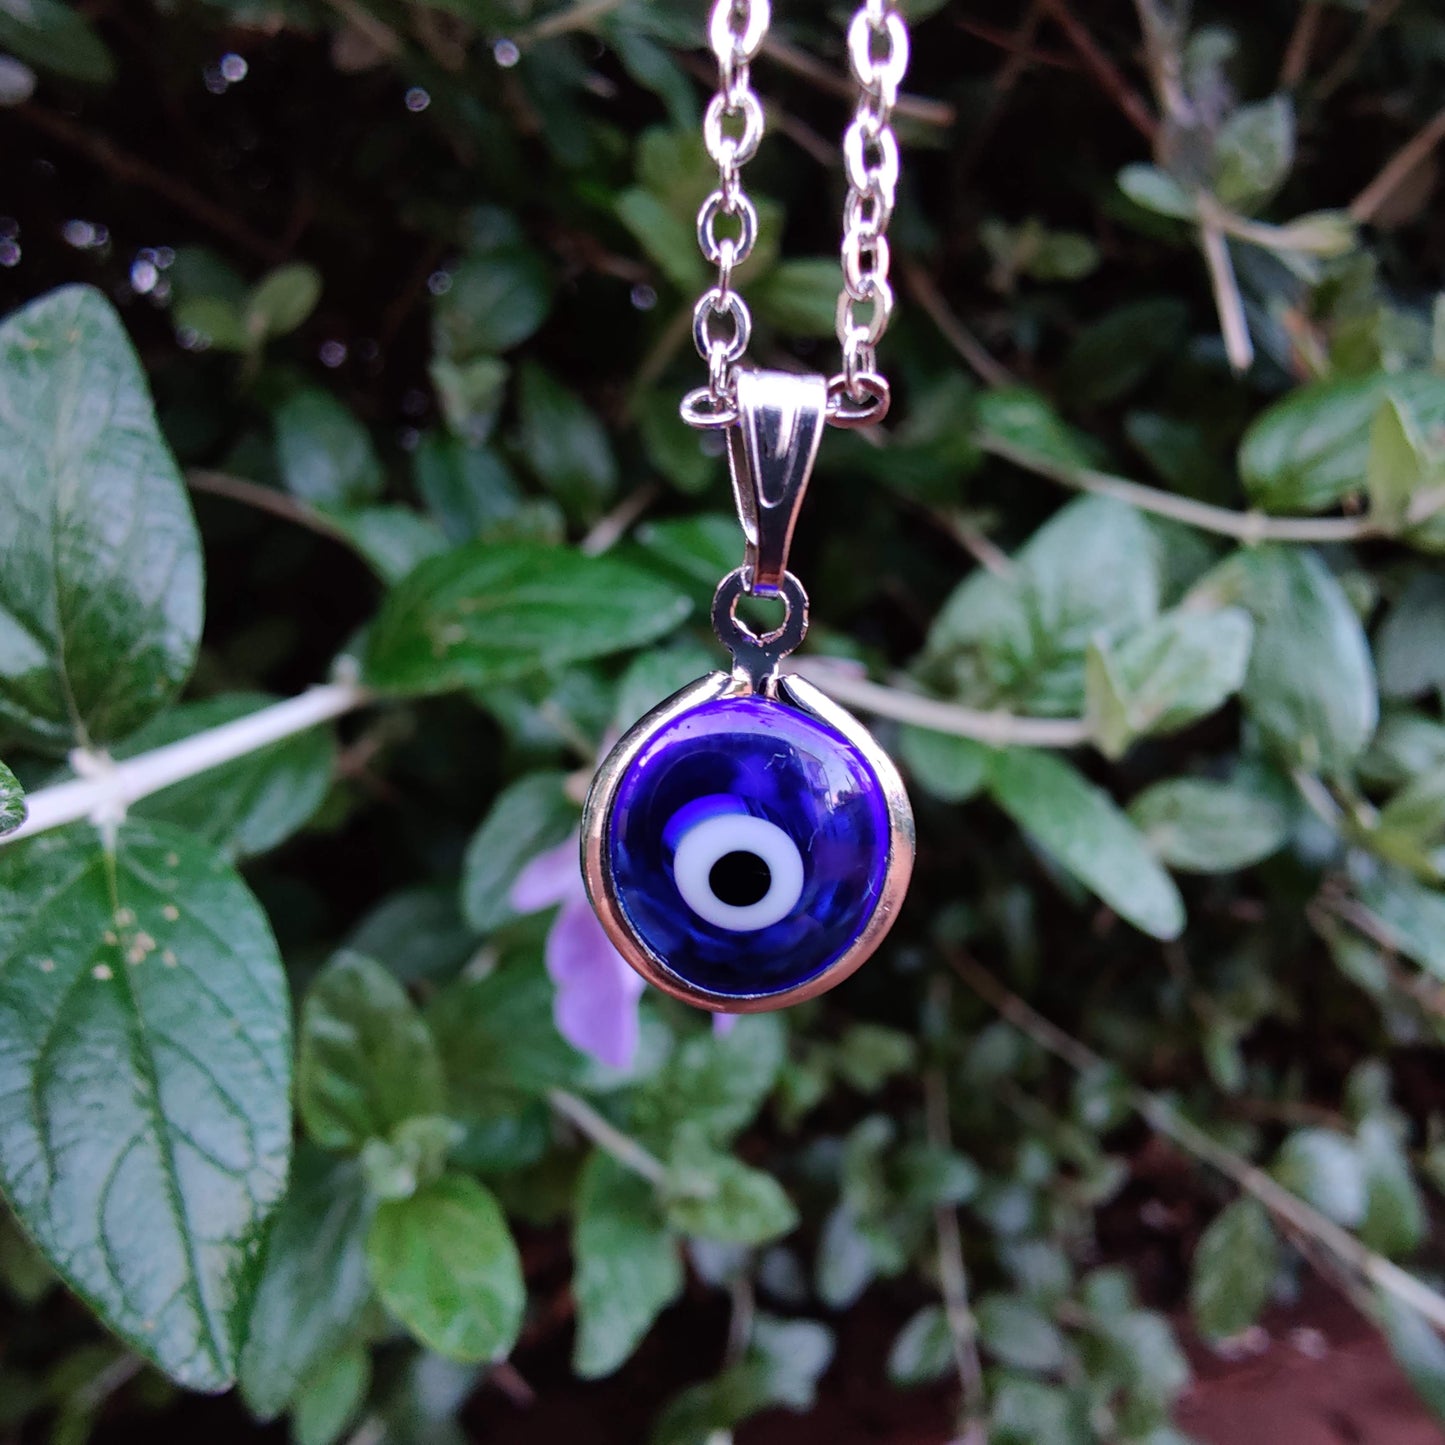 Evil Eye Pendant with Silver Chain - Rivendell Shop